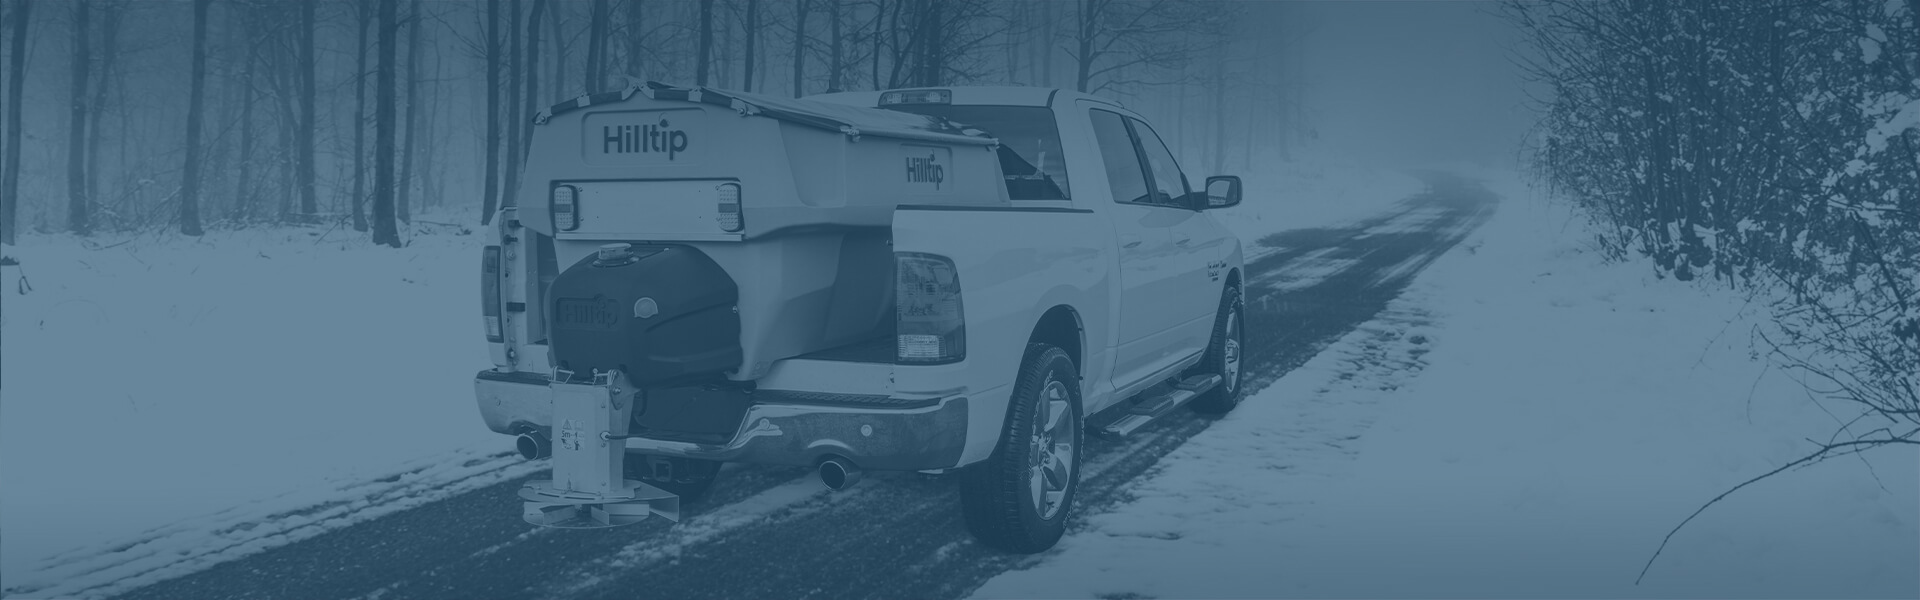 Hilltip Ice and Snow removal products